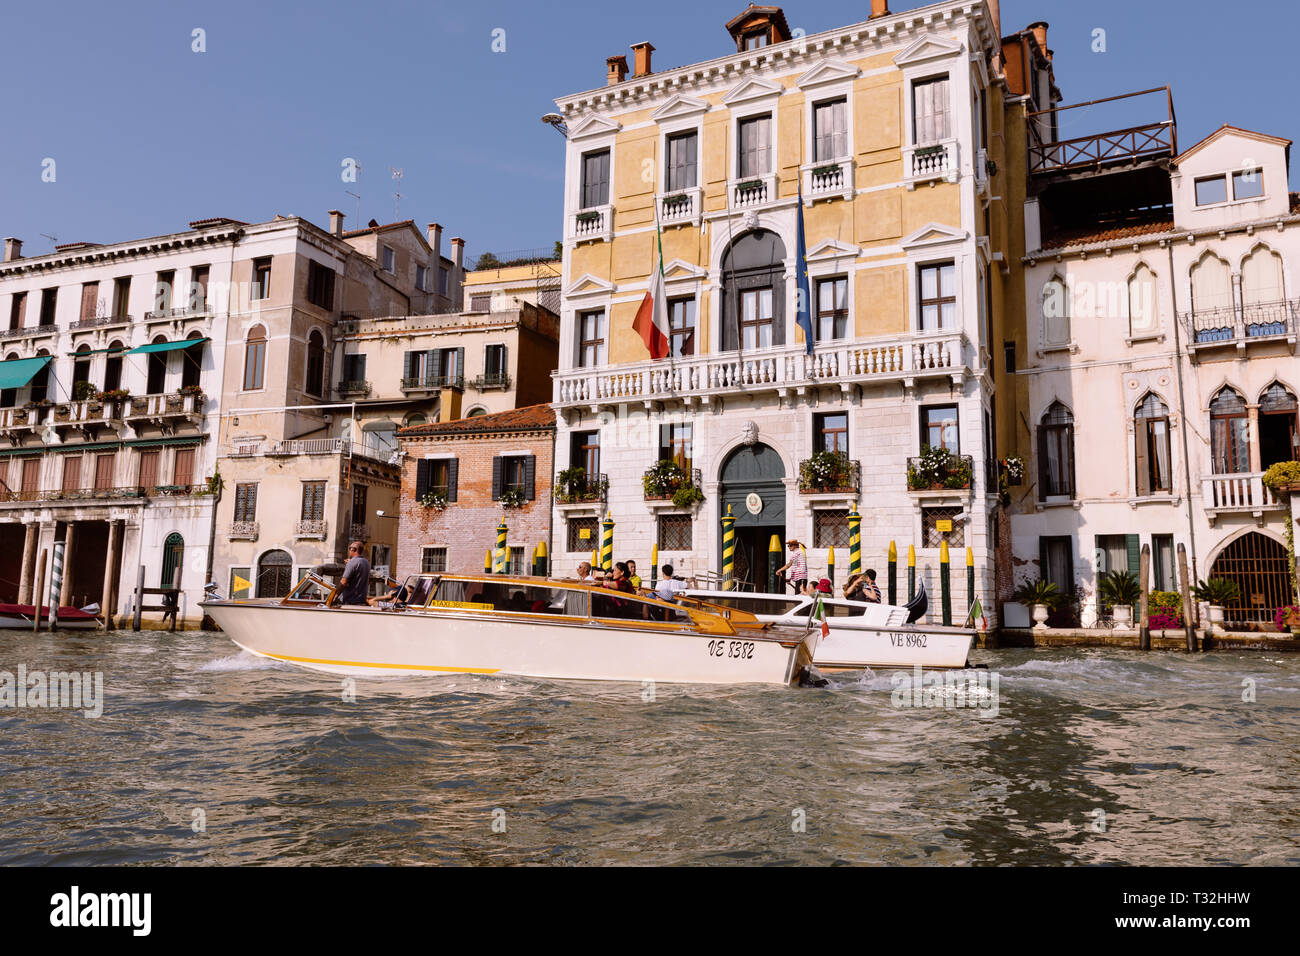 Venice, Italy - July 2, 2018: Closeup photography of motorboats with people and historical buildings of Grand Canal (Canal Grande) from gondola. Summe Stock Photo